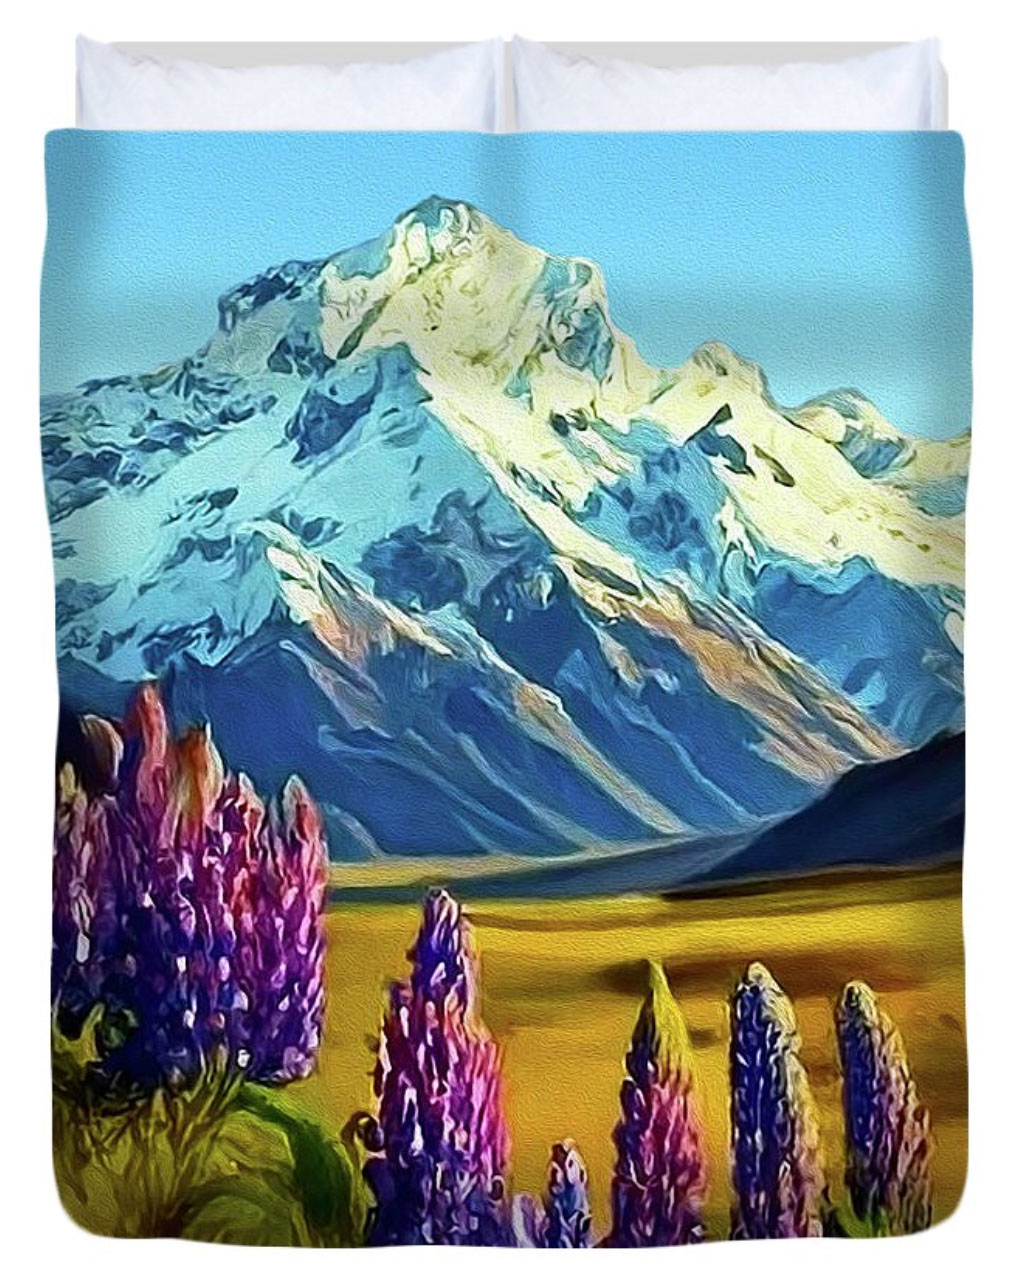 Aoraki with Lupins 1 rendition image